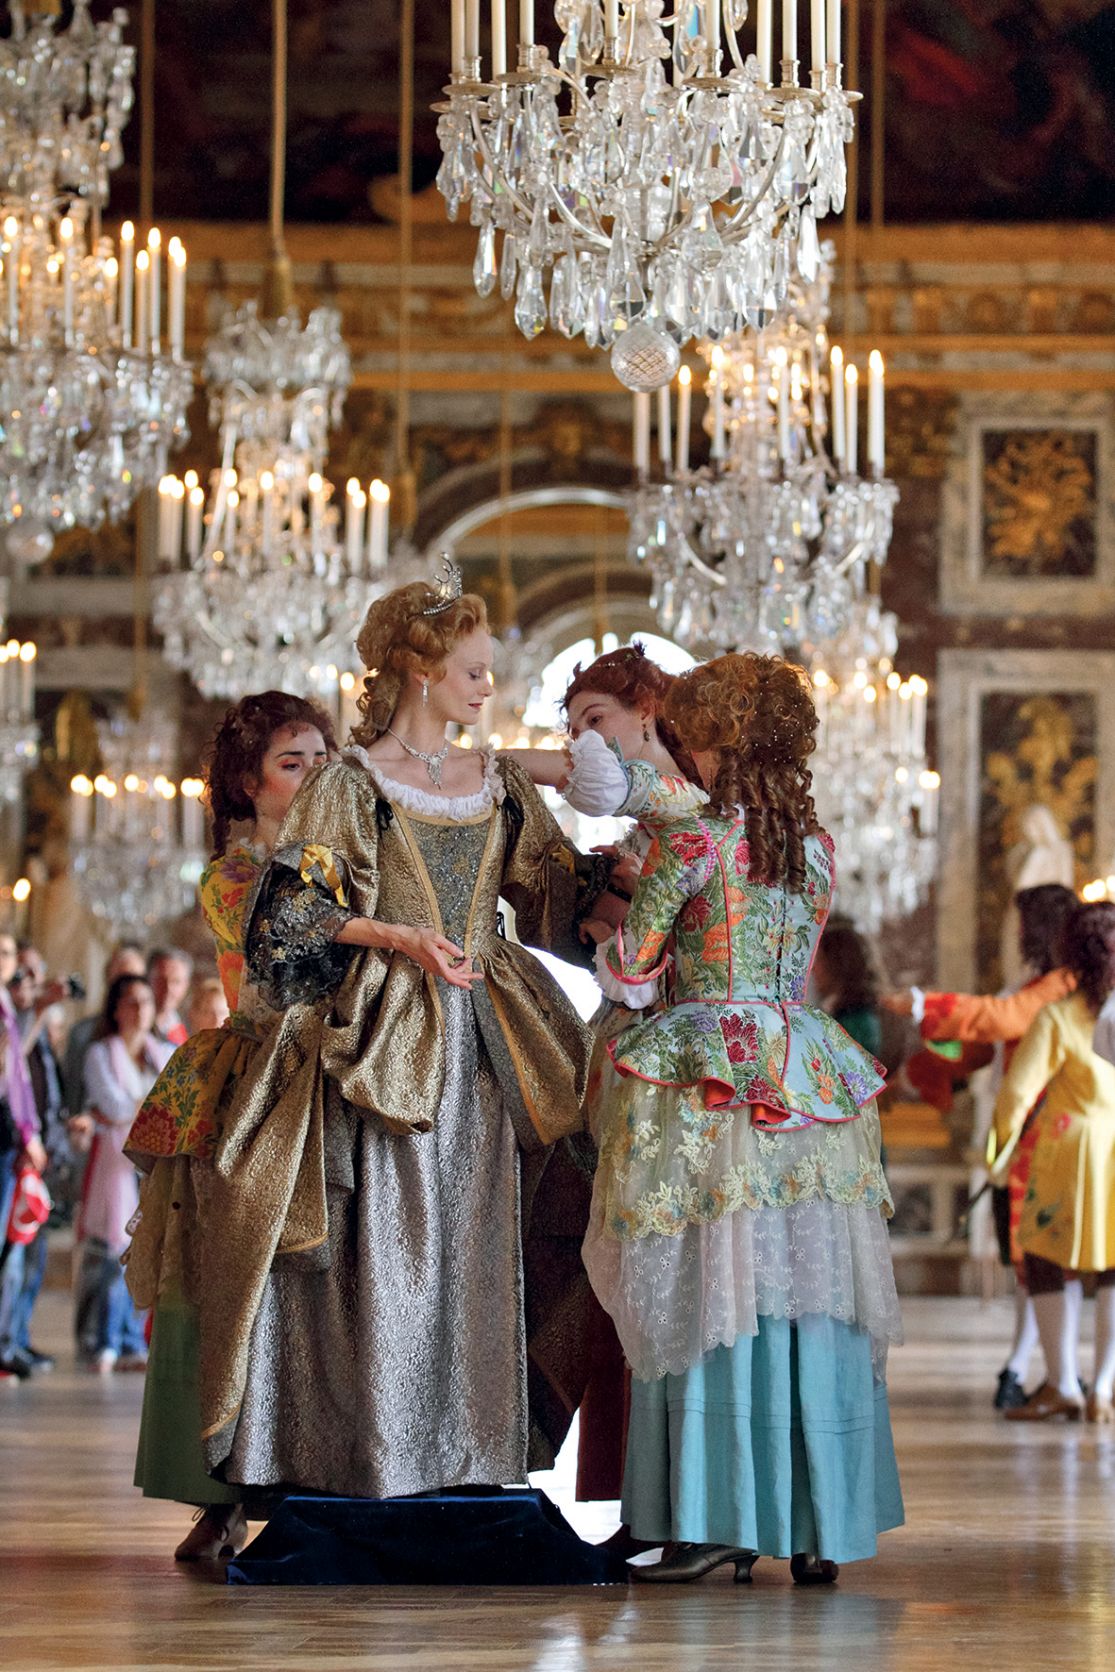 Dancers in the Hall of Mirrors at the Versailles Palace